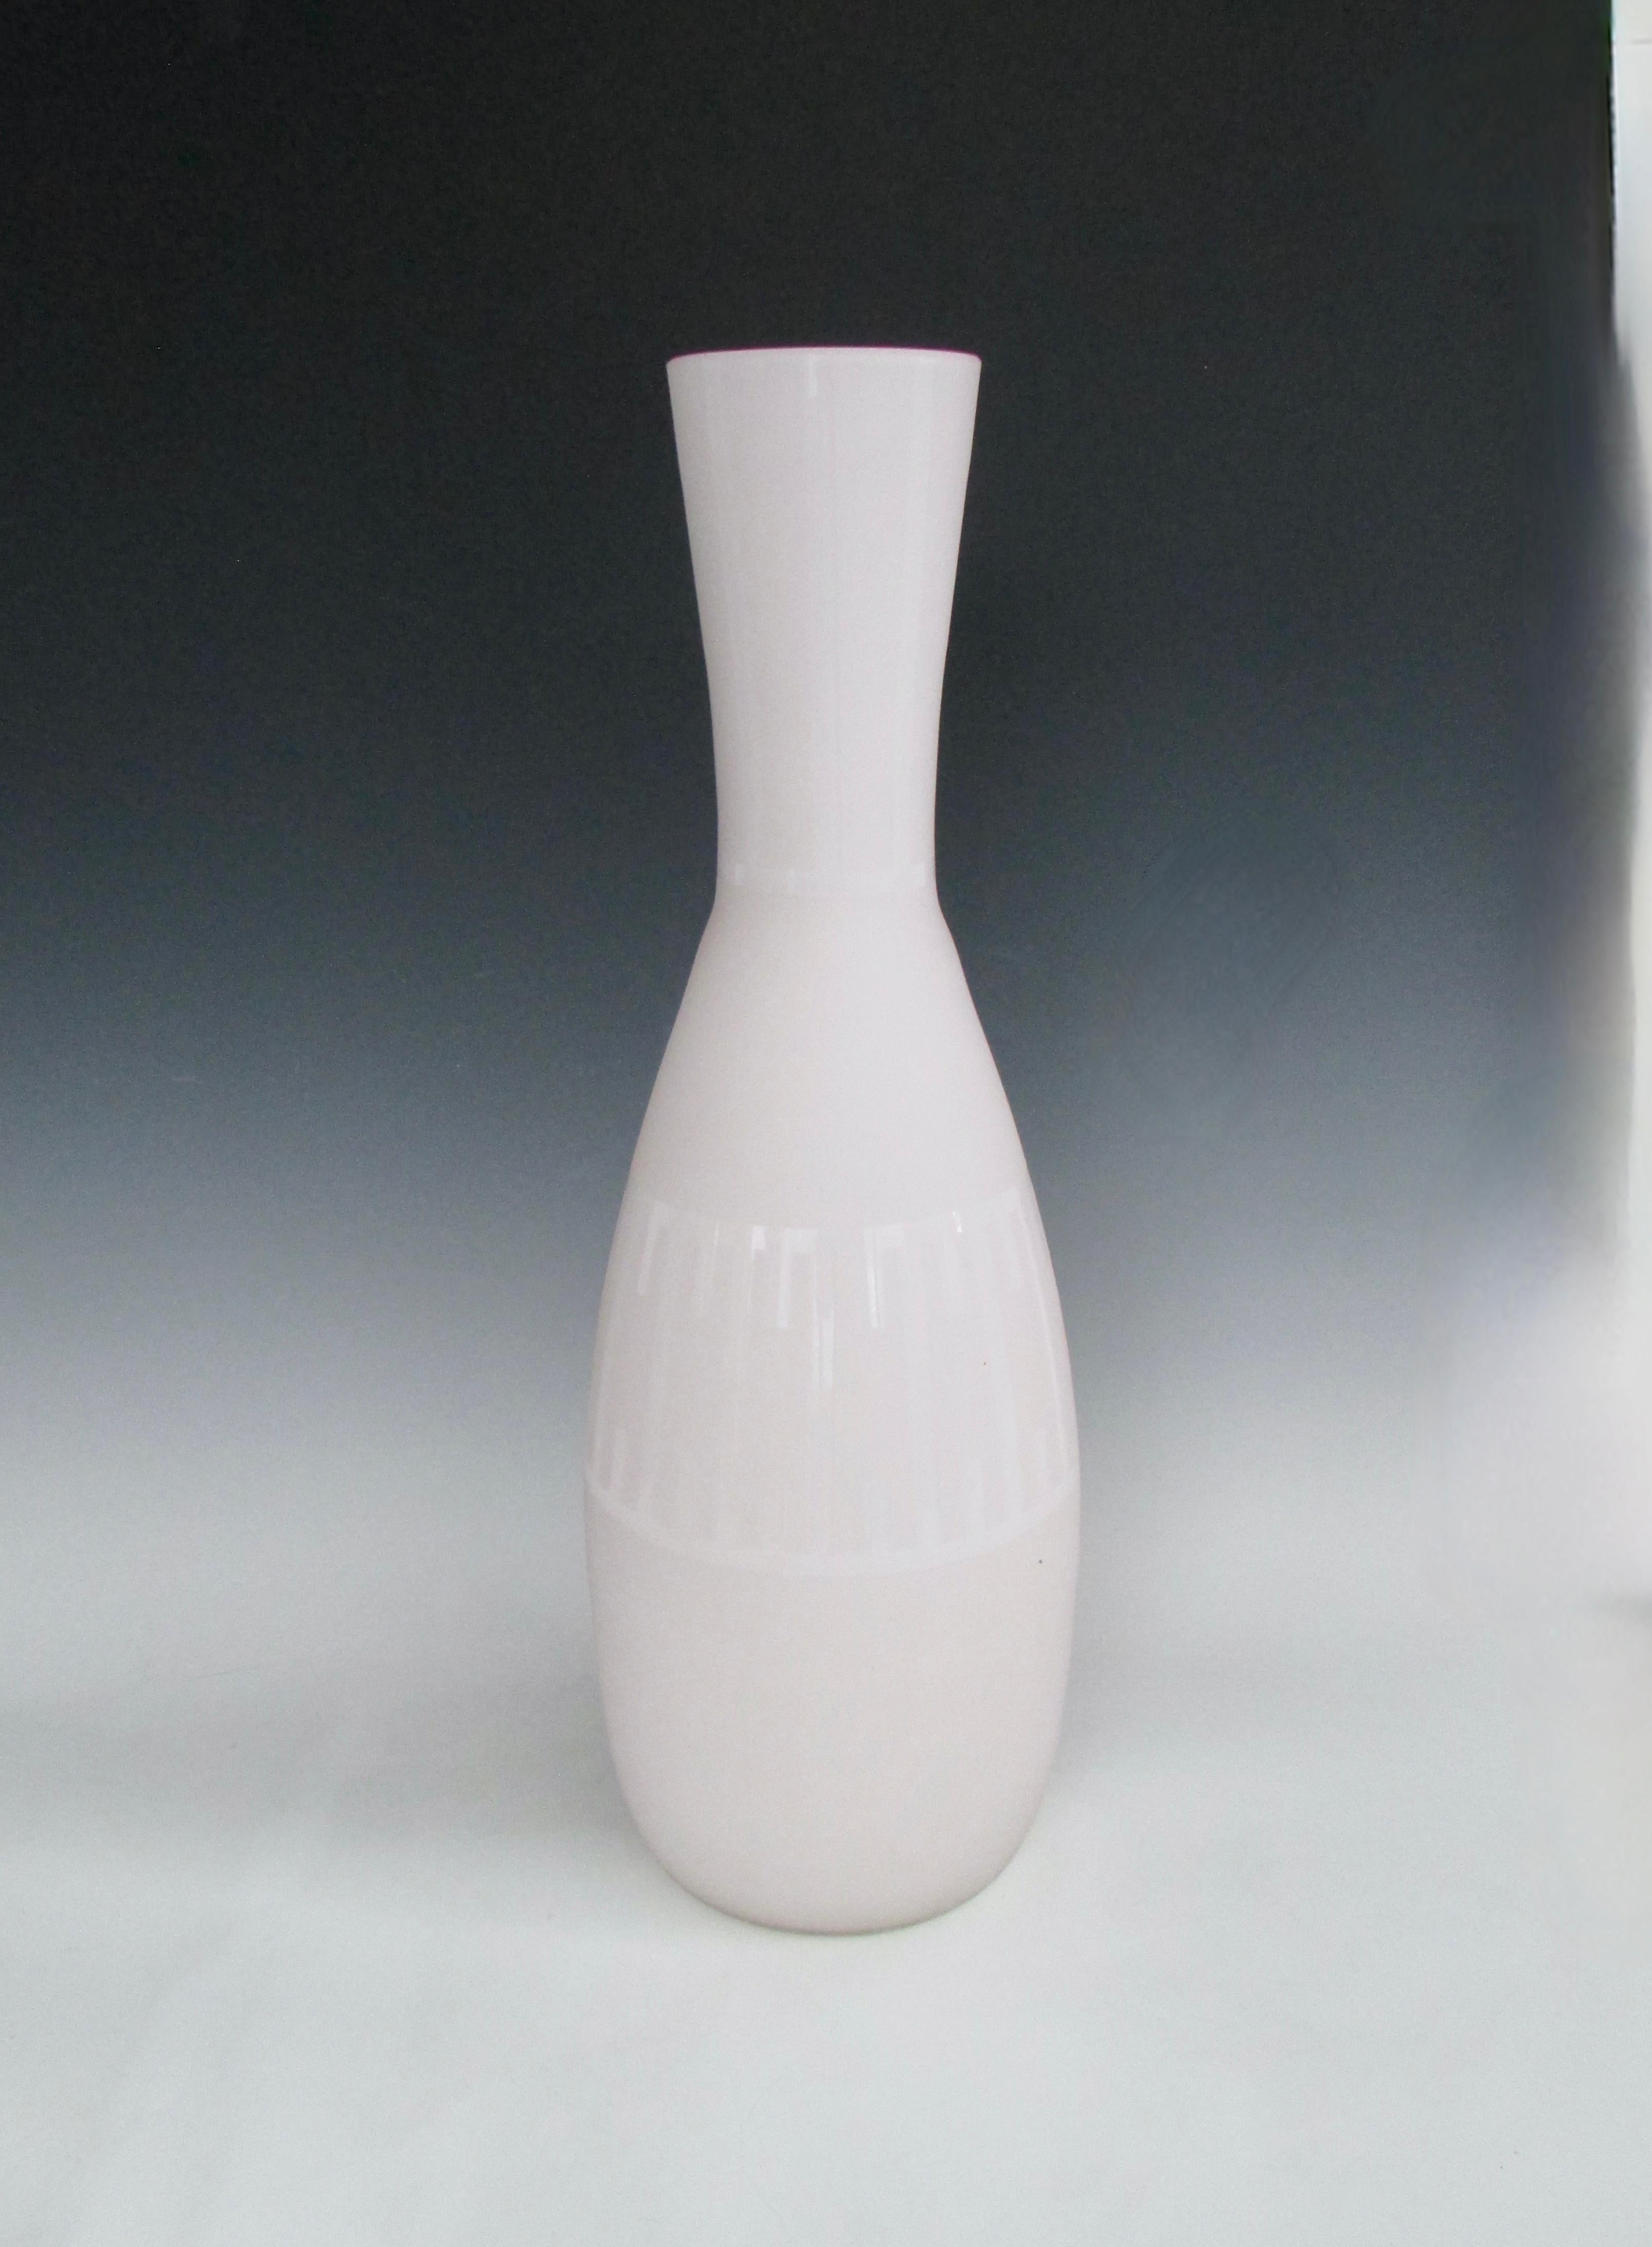 Tall cased glass floor vase in matte finish with gloss design.